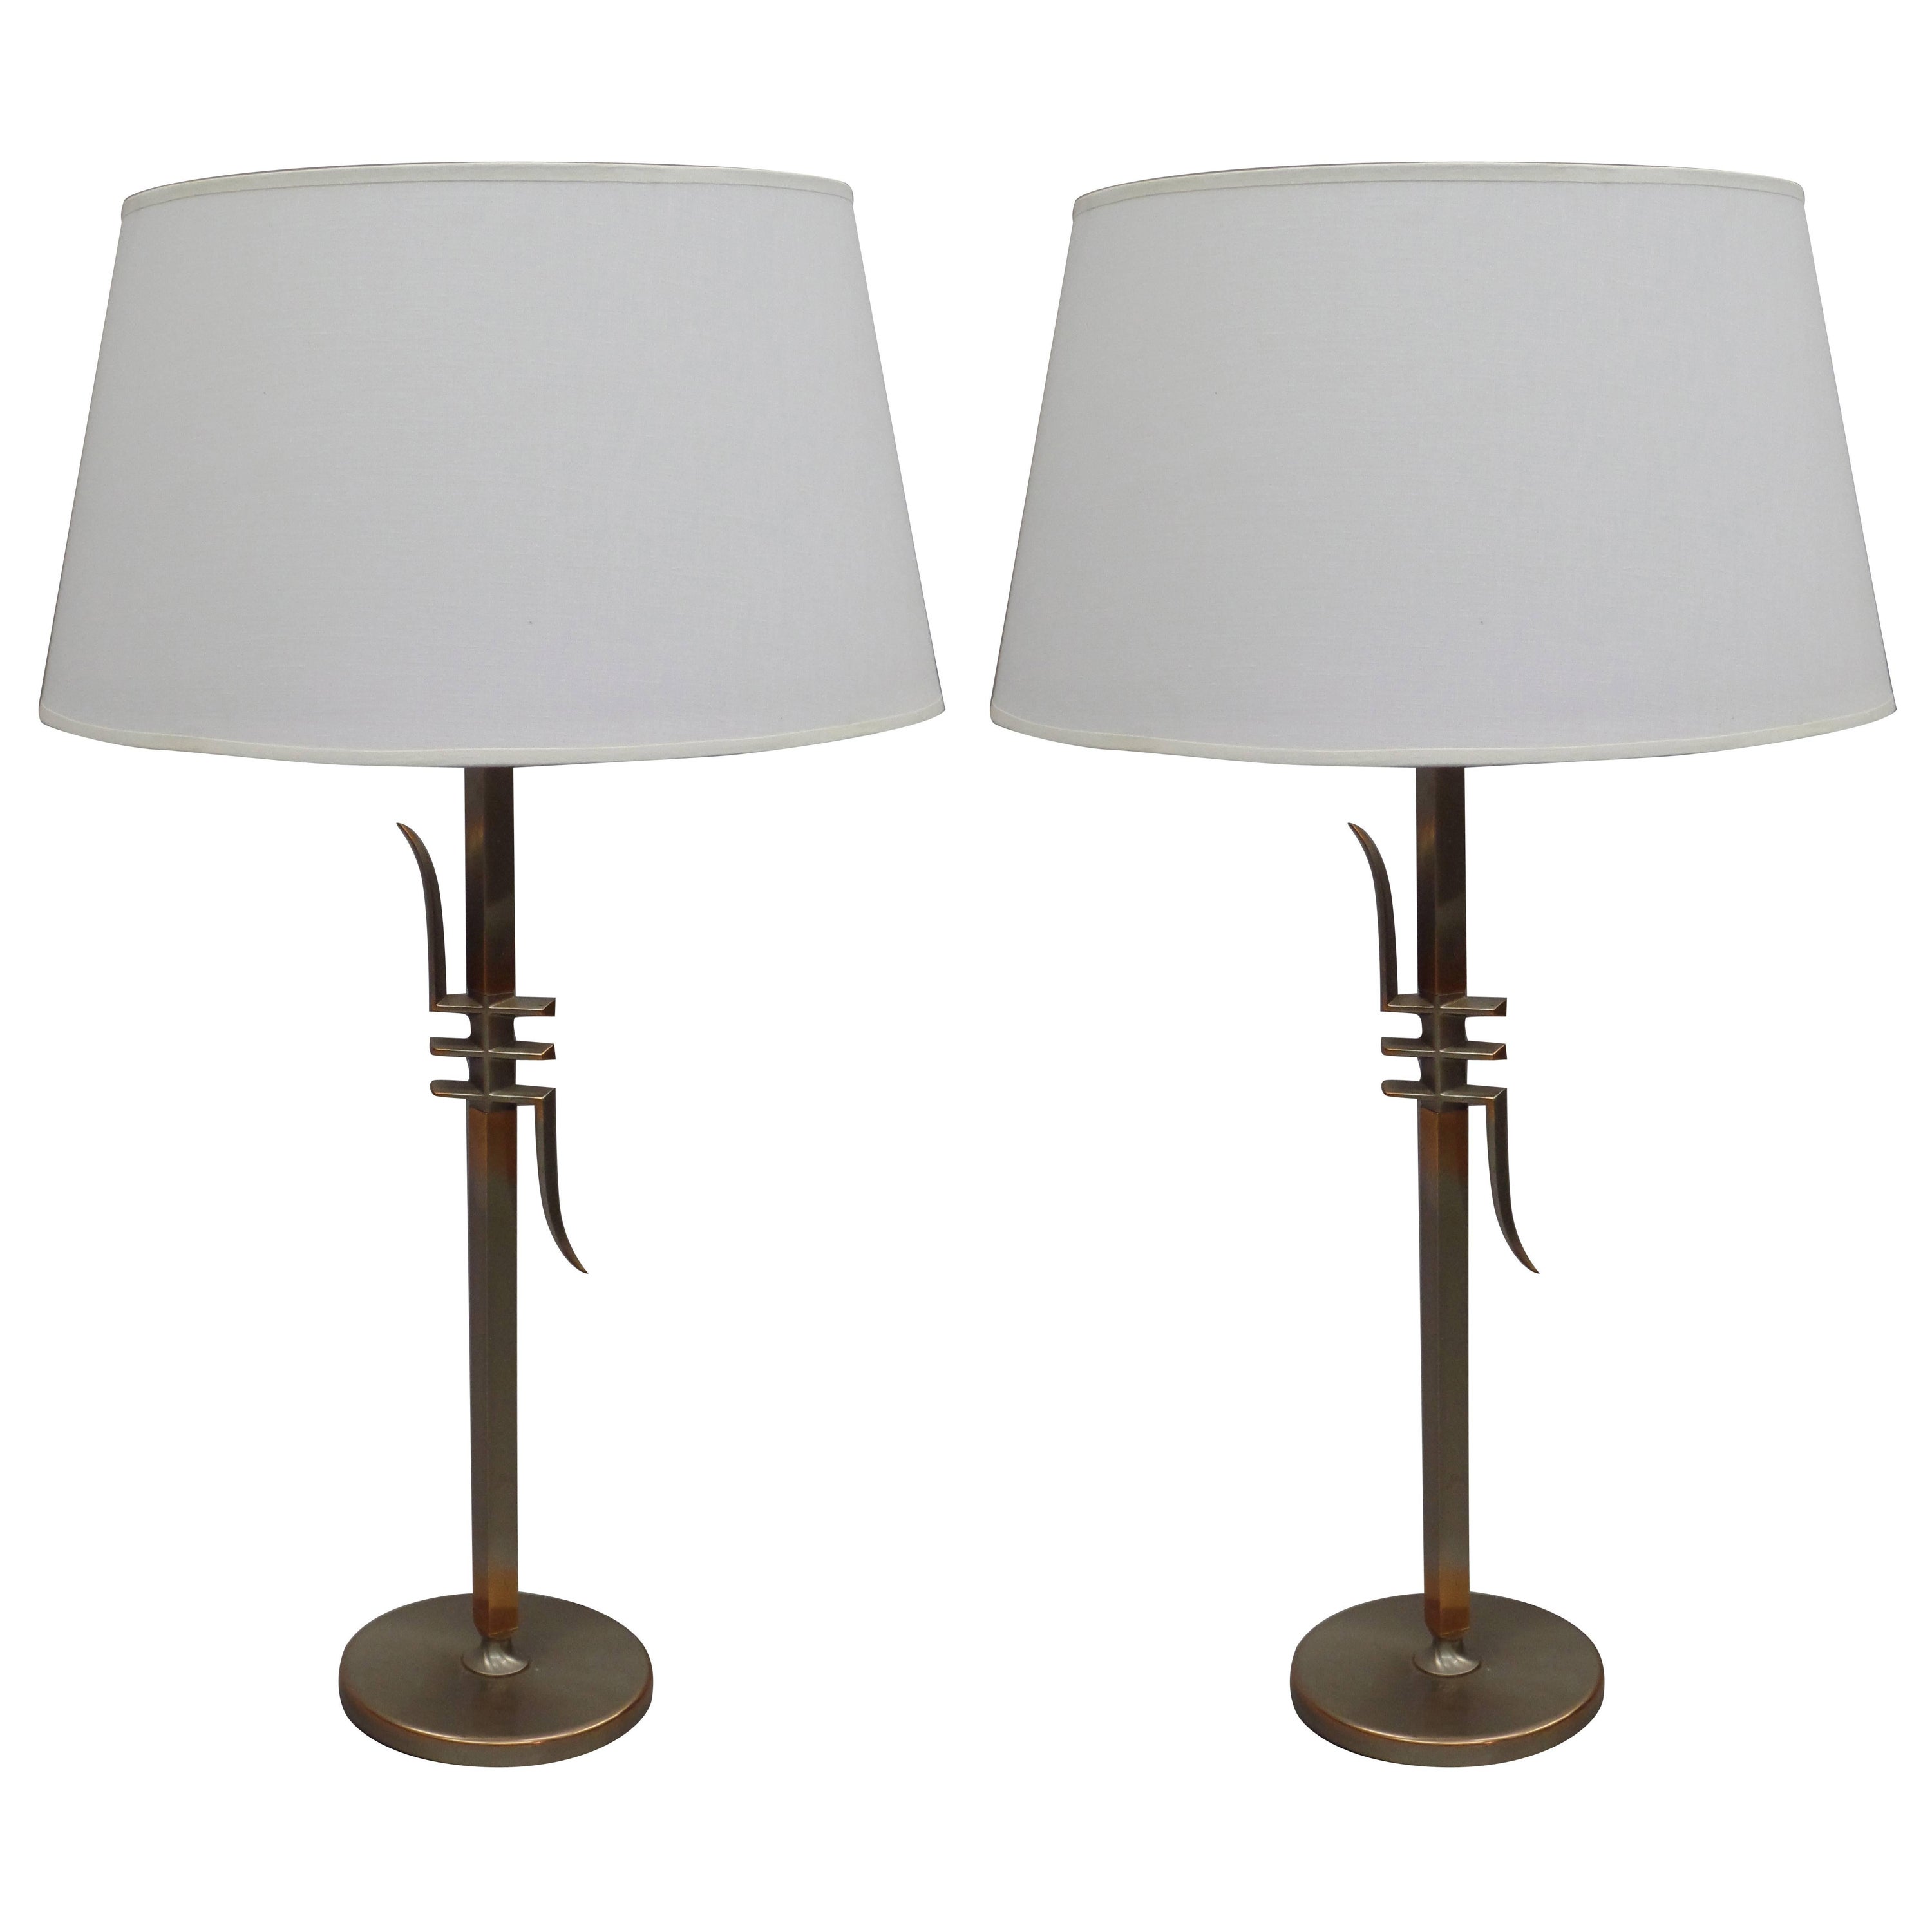 Pair of Mid-Century Modern Nickeled Copper Table Lamps Attributed to James Mont For Sale